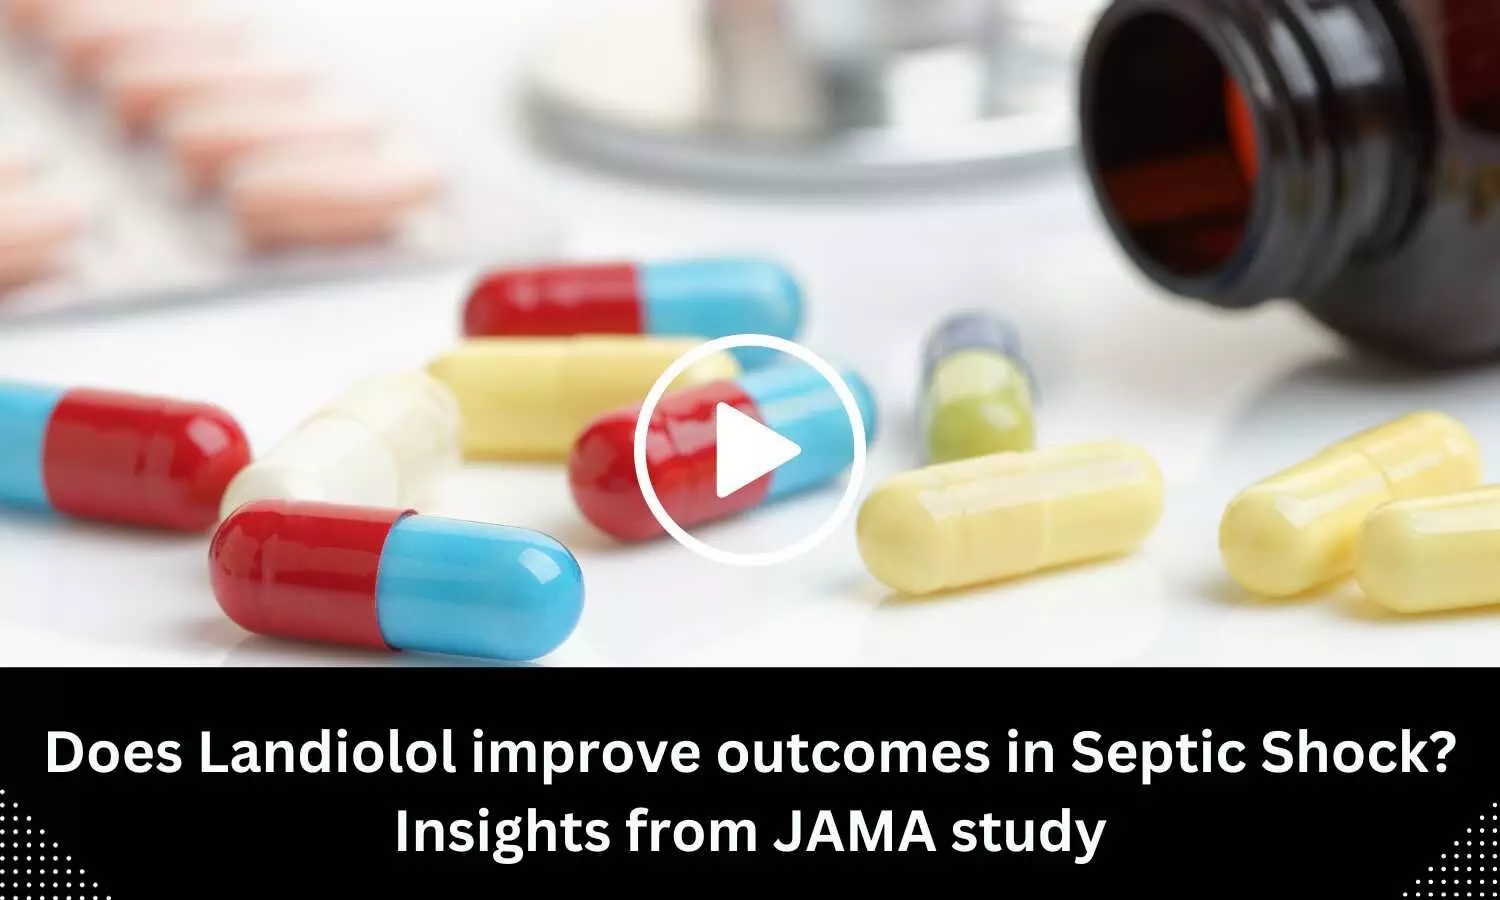 Does Landiolol improve outcomes in Septic Shock? Insights from JAMA study